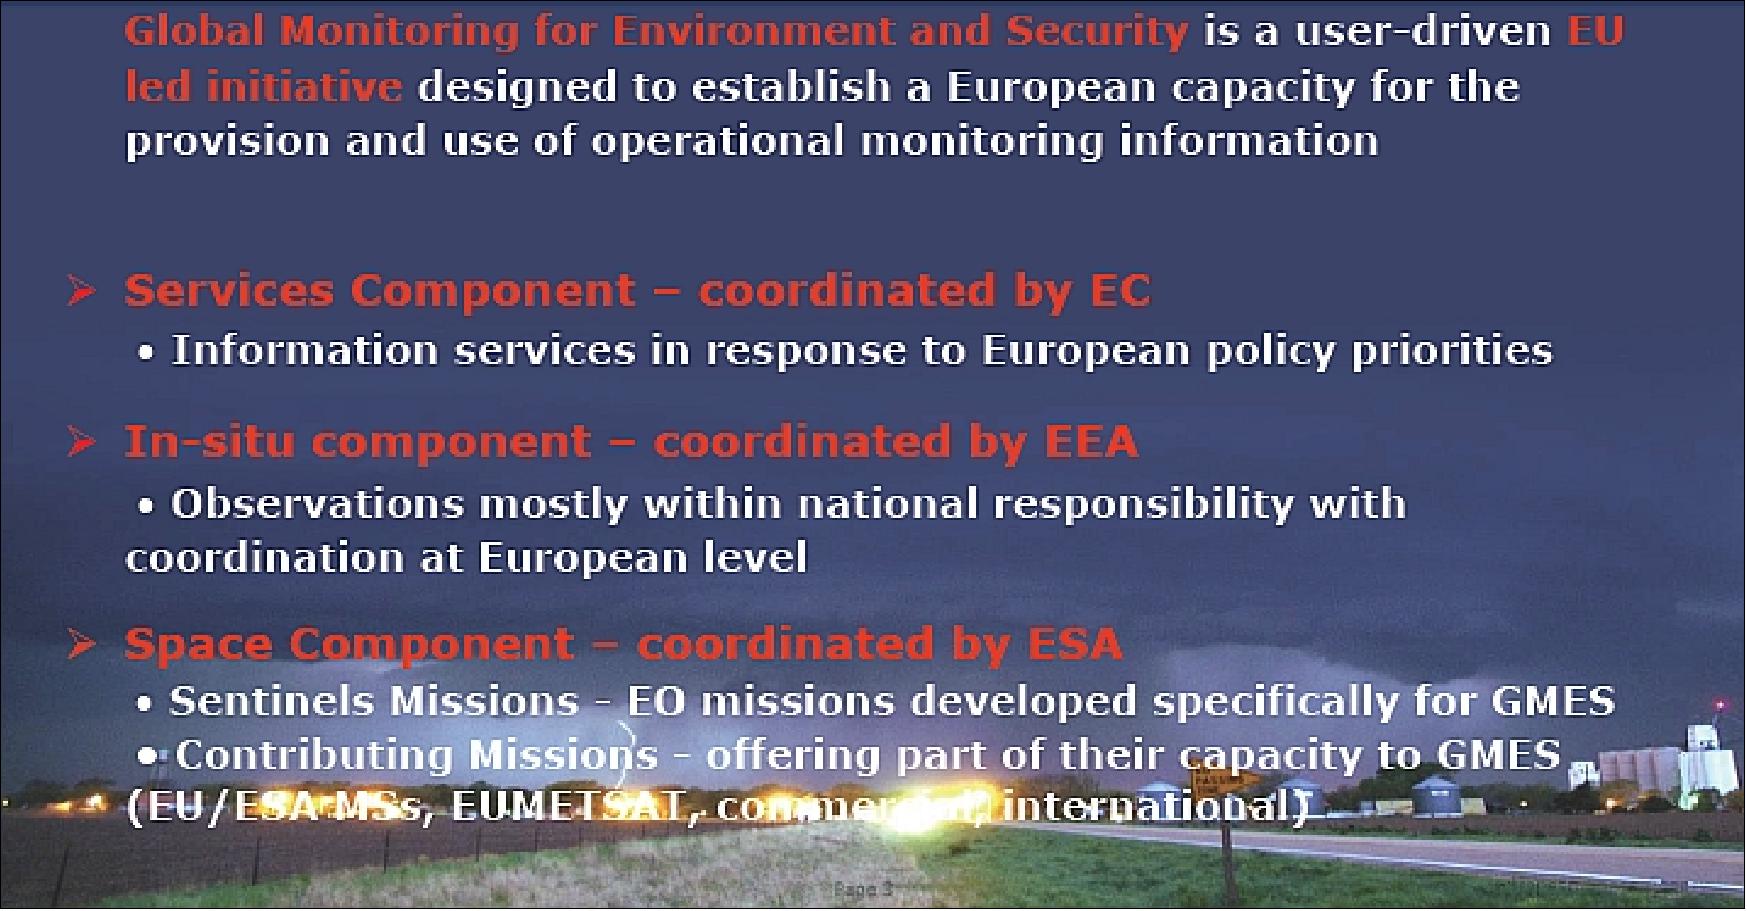 Figure 27: Overview of GMES components and responsibilities (image credit: ESA,Ref. 59)